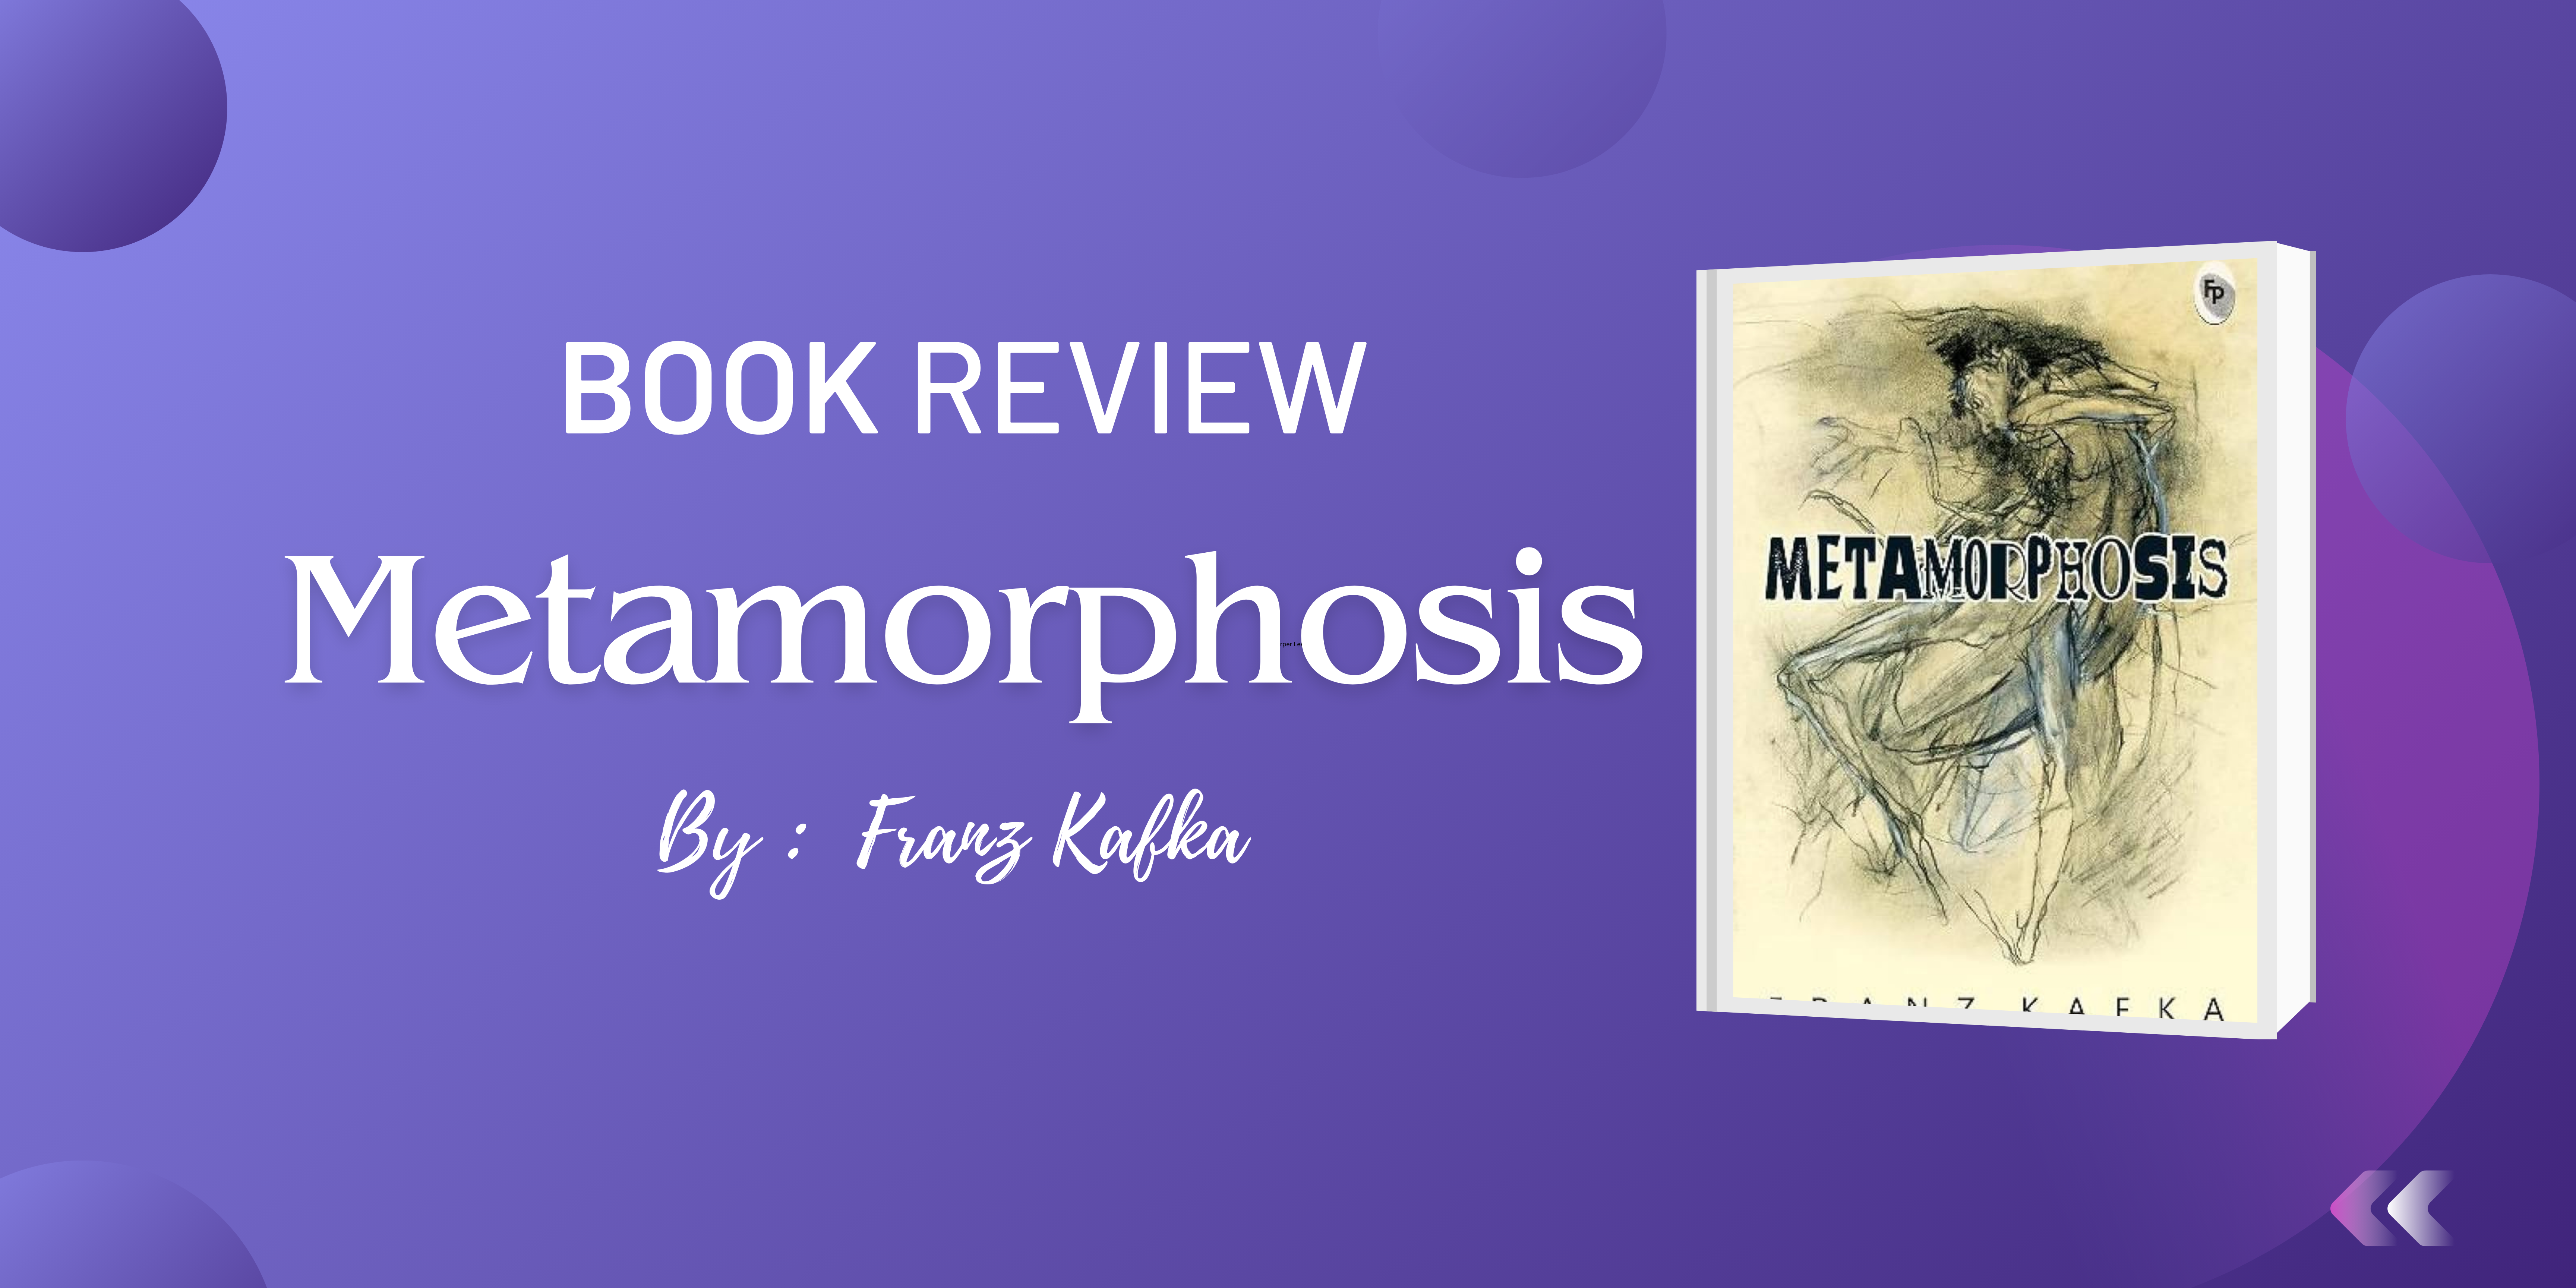 Metamorphosis by Franz Kafka – Reviewing Samsa’s Relevance in a Capitalistic World.